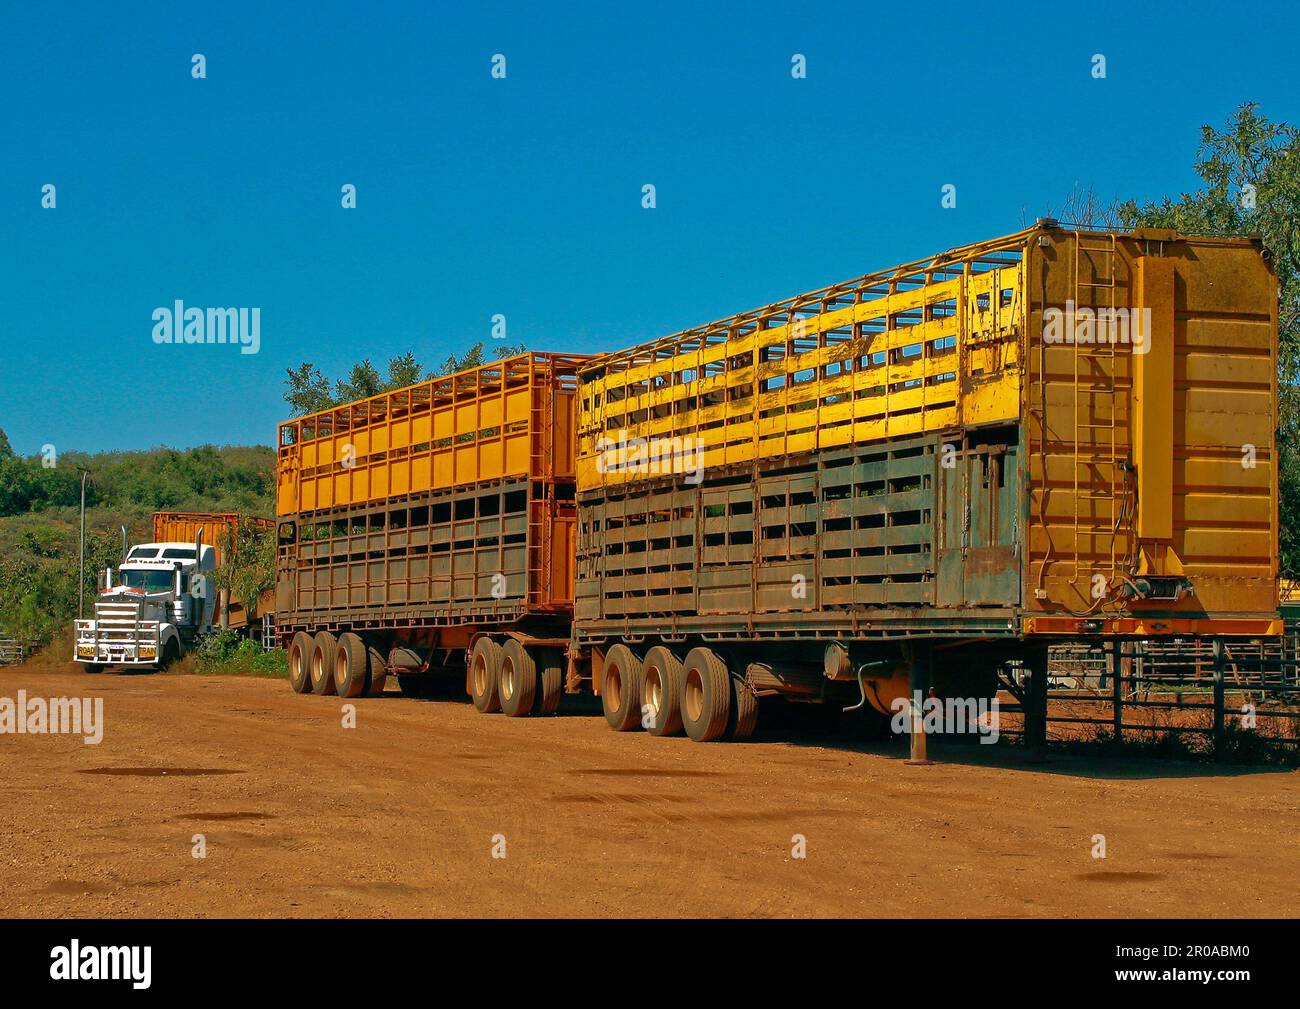 Huge road train used for transporting live cattle through Western Australia and the Australian outback Stock Photo